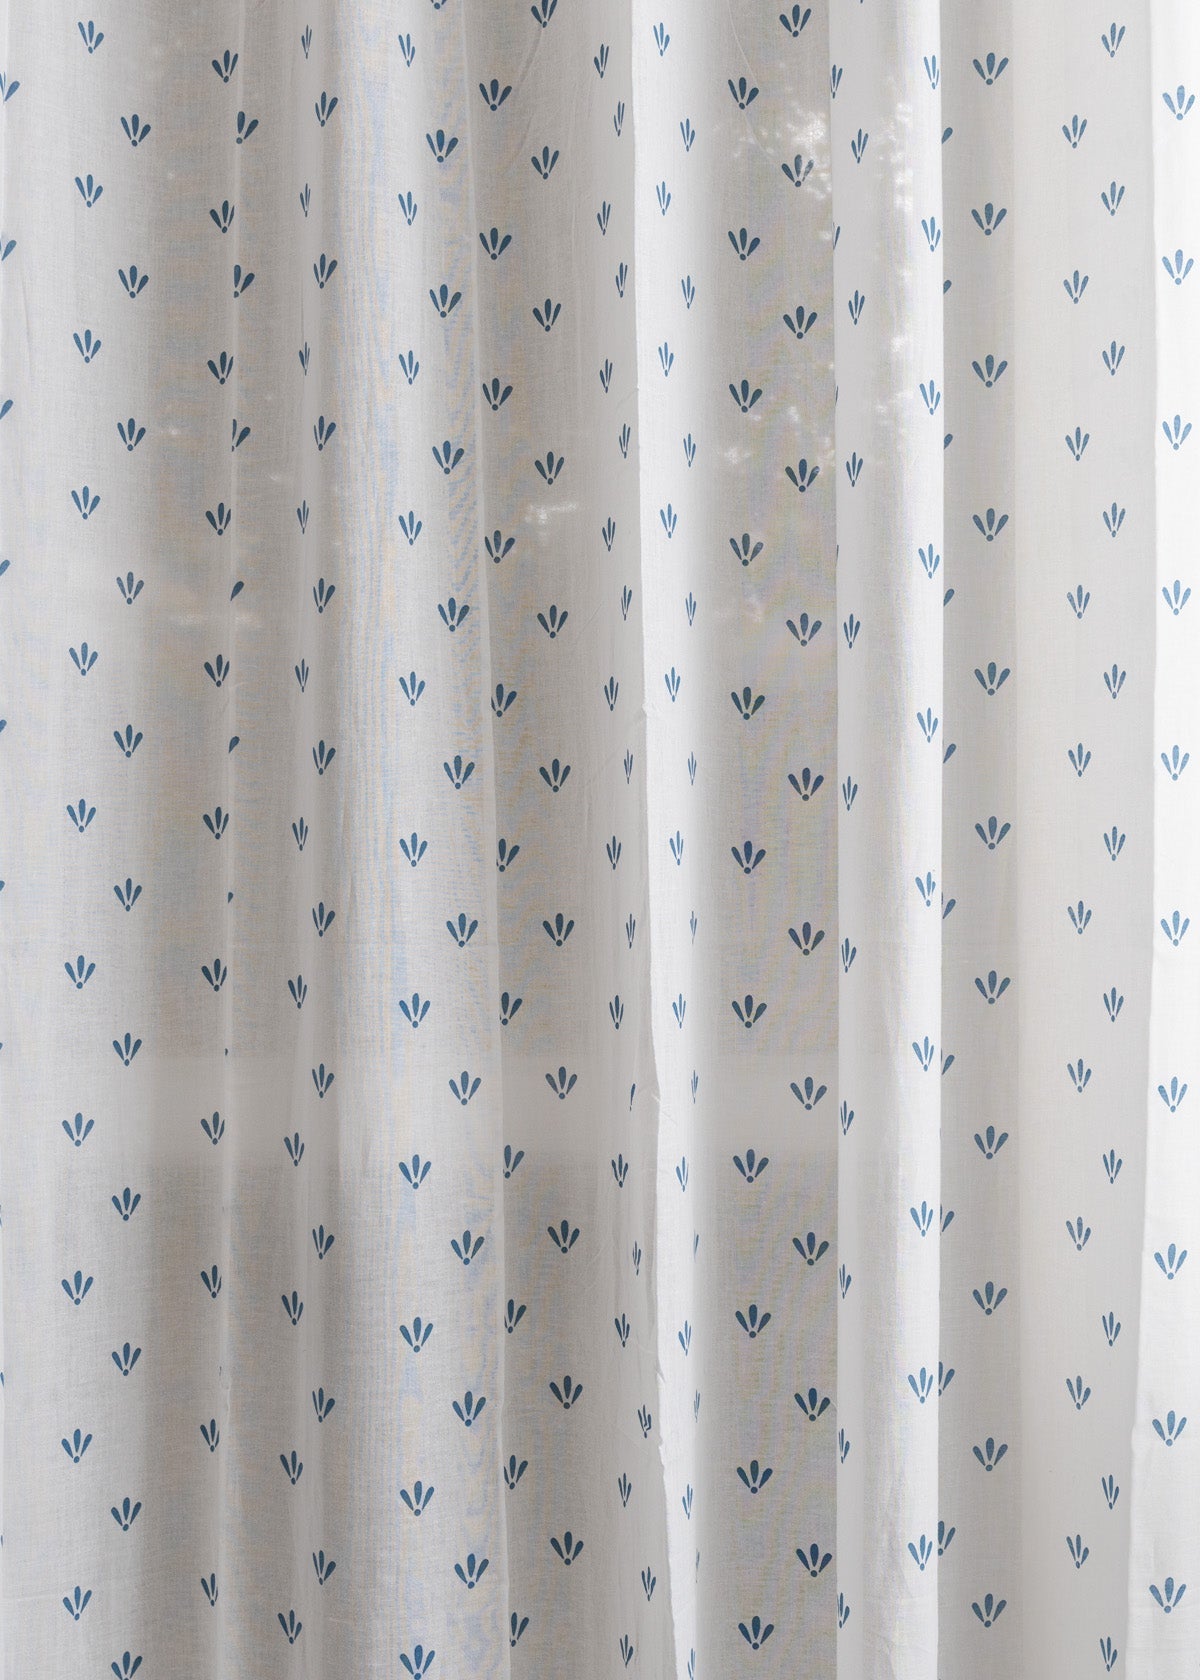 Aniseed 100% cotton floral sheer curtain for living room - Light filtering - Indigo - Pack of 1